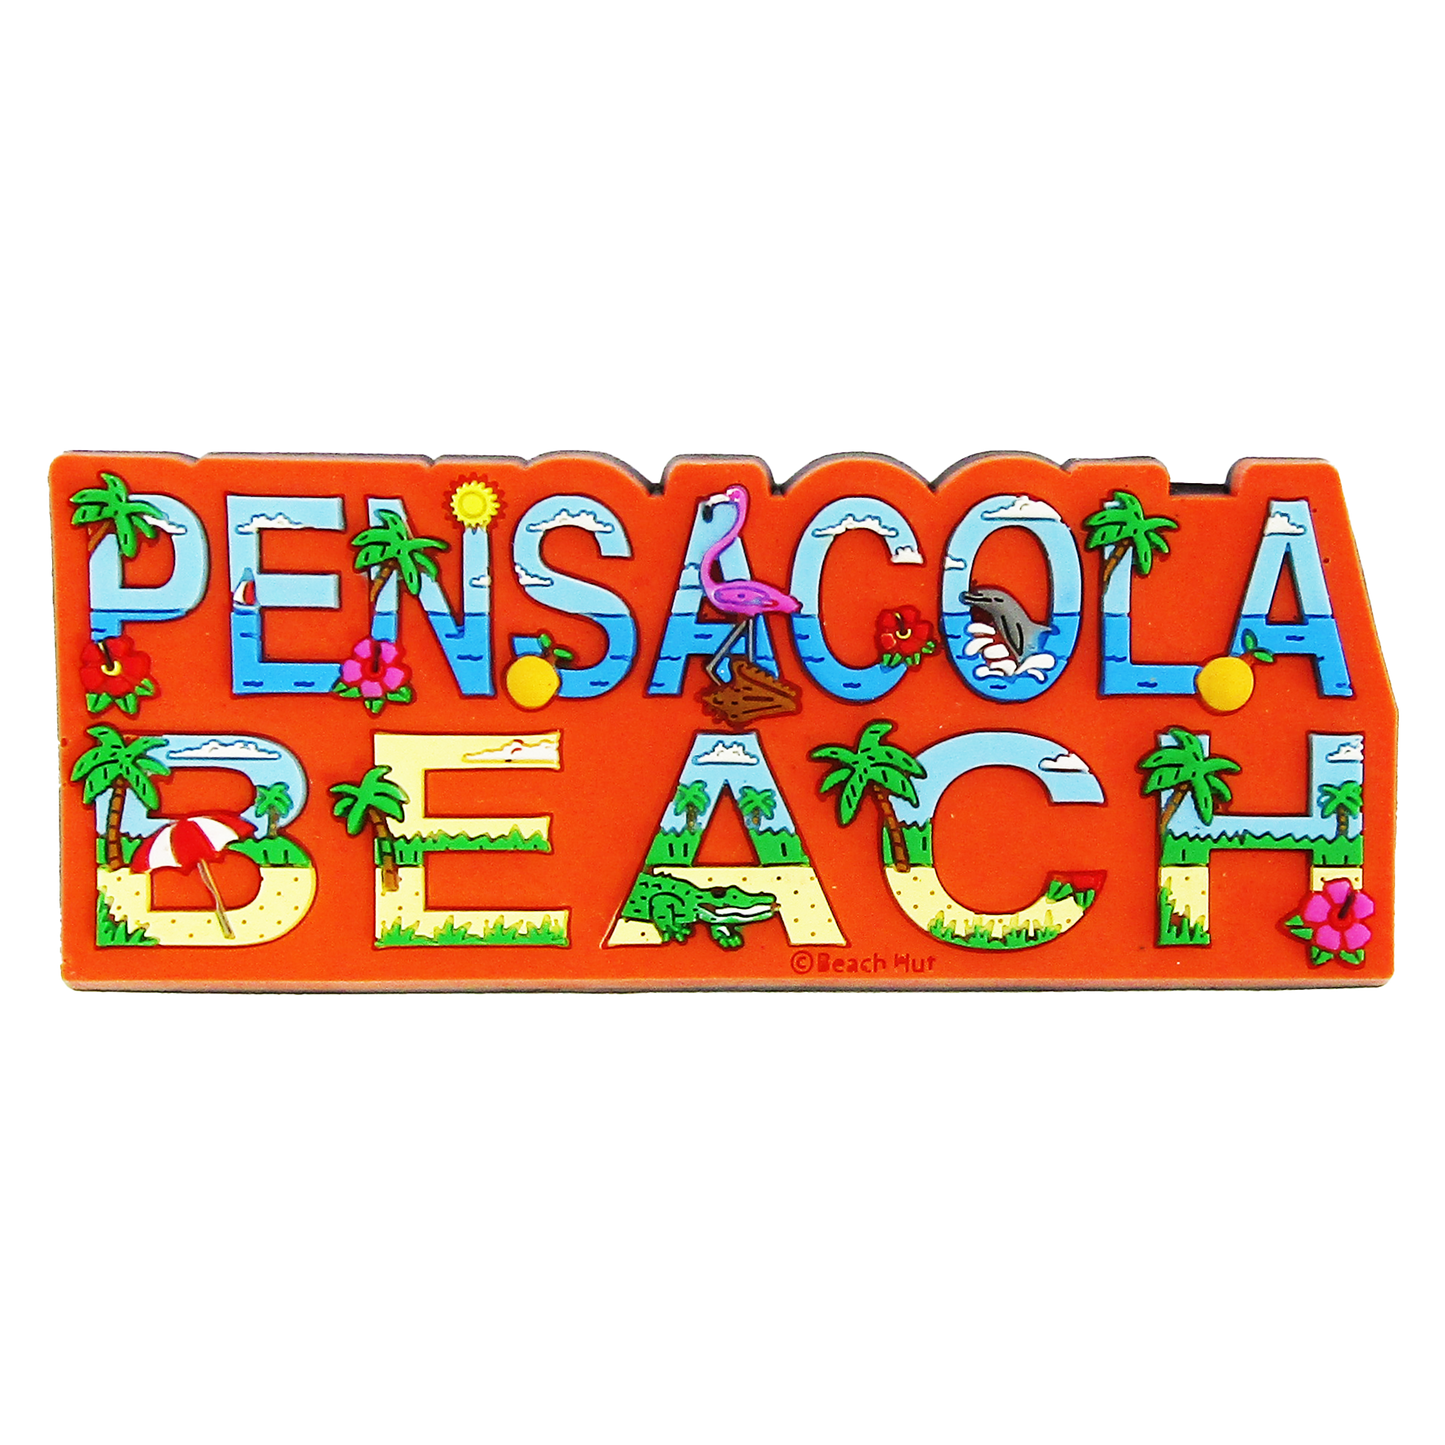 RM0160 PENSACOLA BEACH LETTERS RED